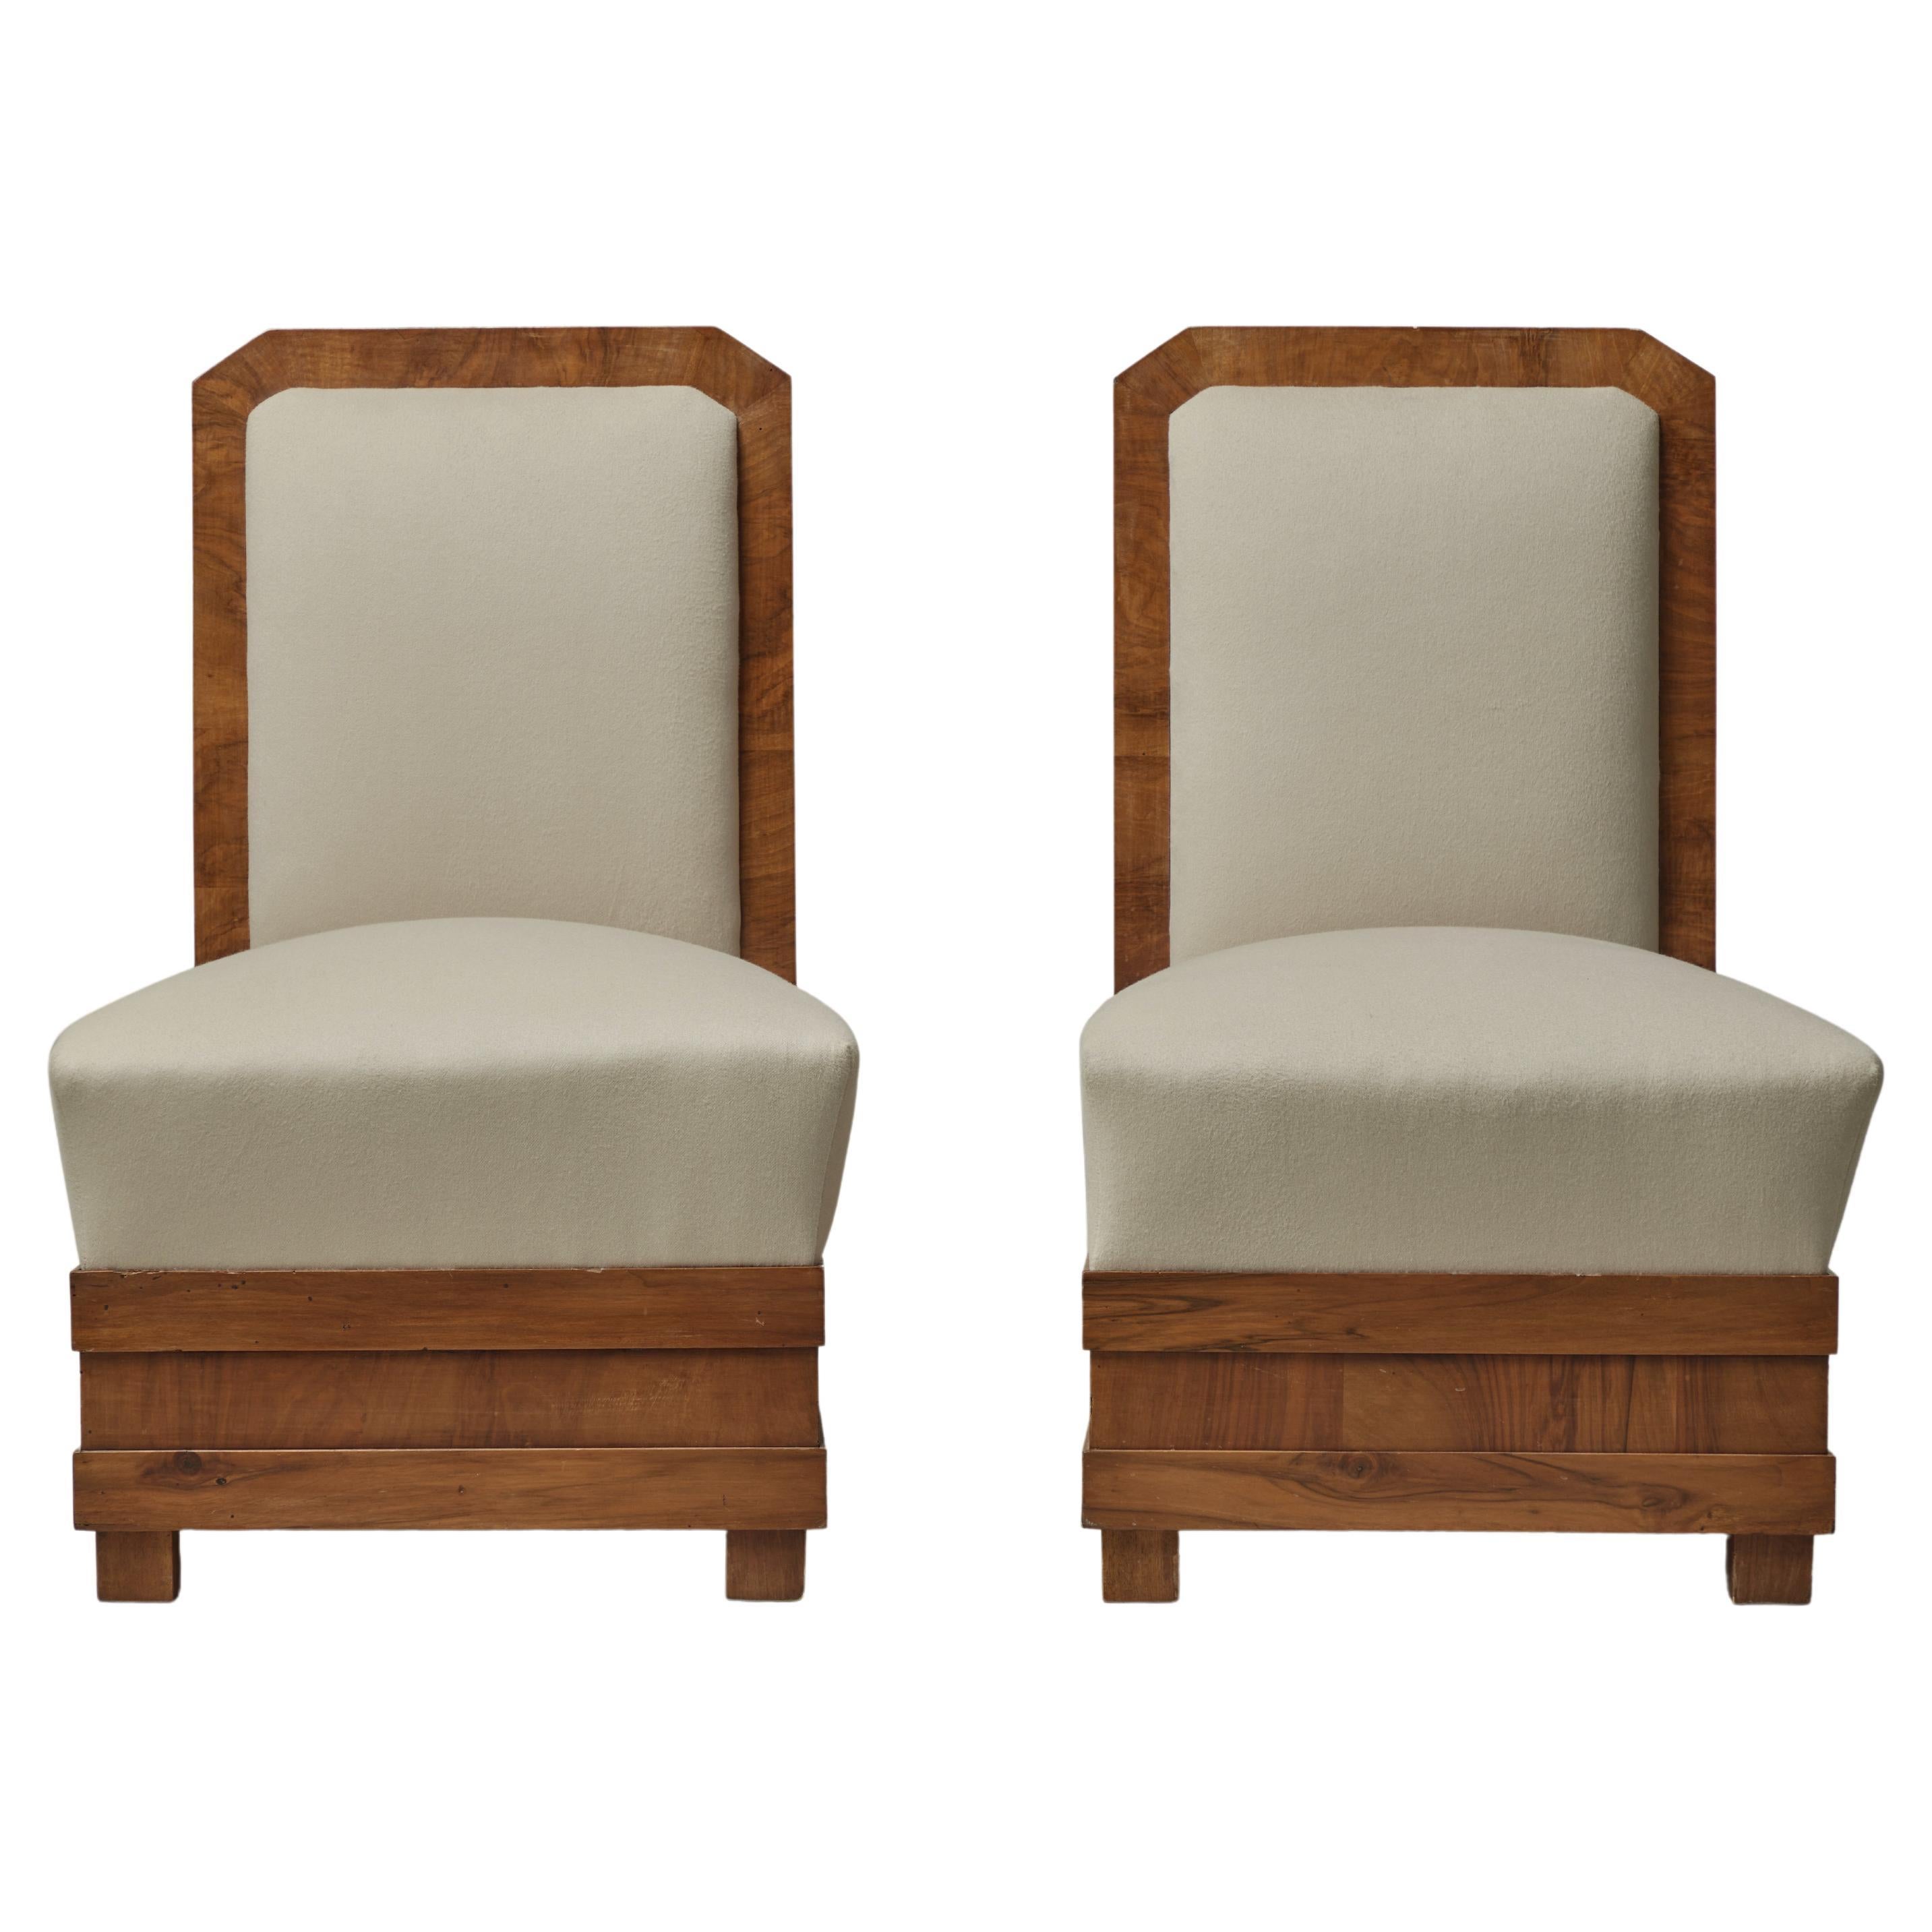 Vintage Pair of Art Deco Slipper Chairs in Wool and Wood, 1920s